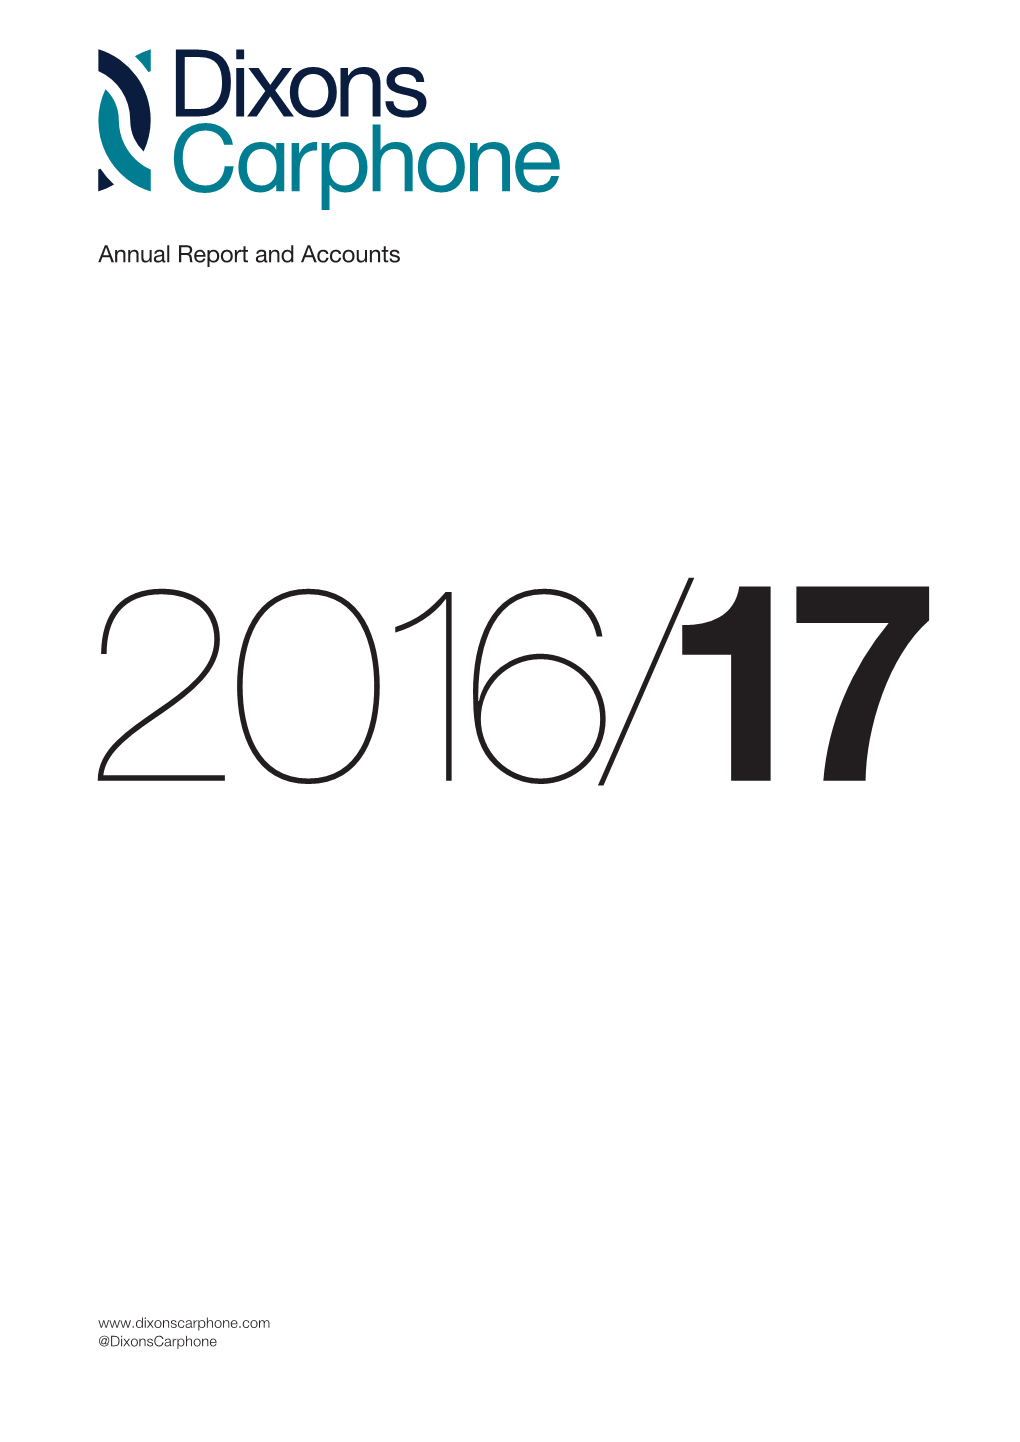 Annual Report and Accounts Annual Report and Accounts 2016/17 2 016 /17